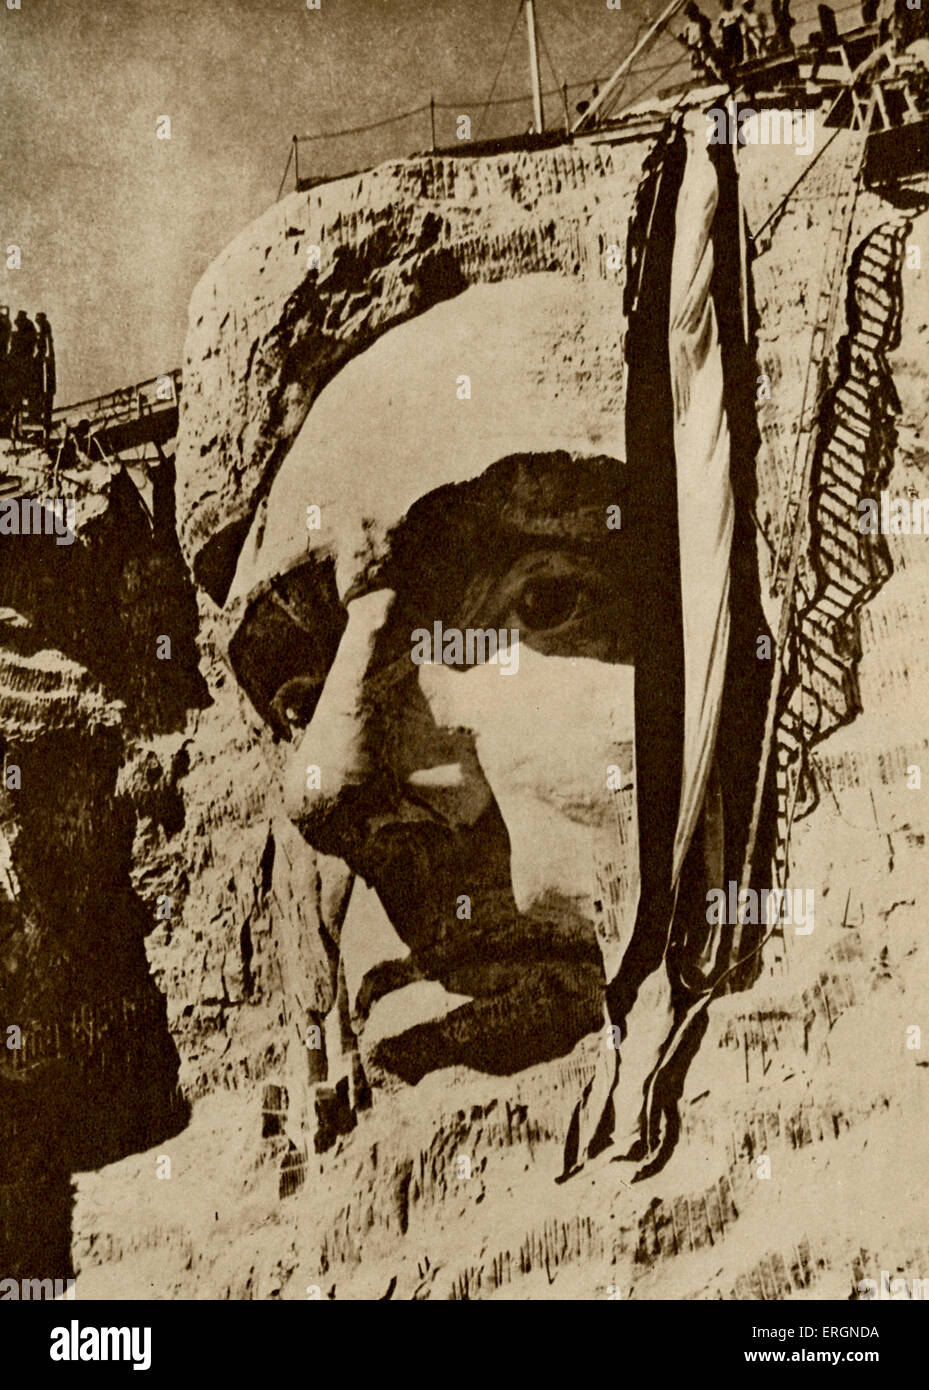 Abraham Lincoln - 12th February 1809 – 15th April 1865. Carved out of granite in Mount Rushmore, South Dakota, USA. After Stock Photo